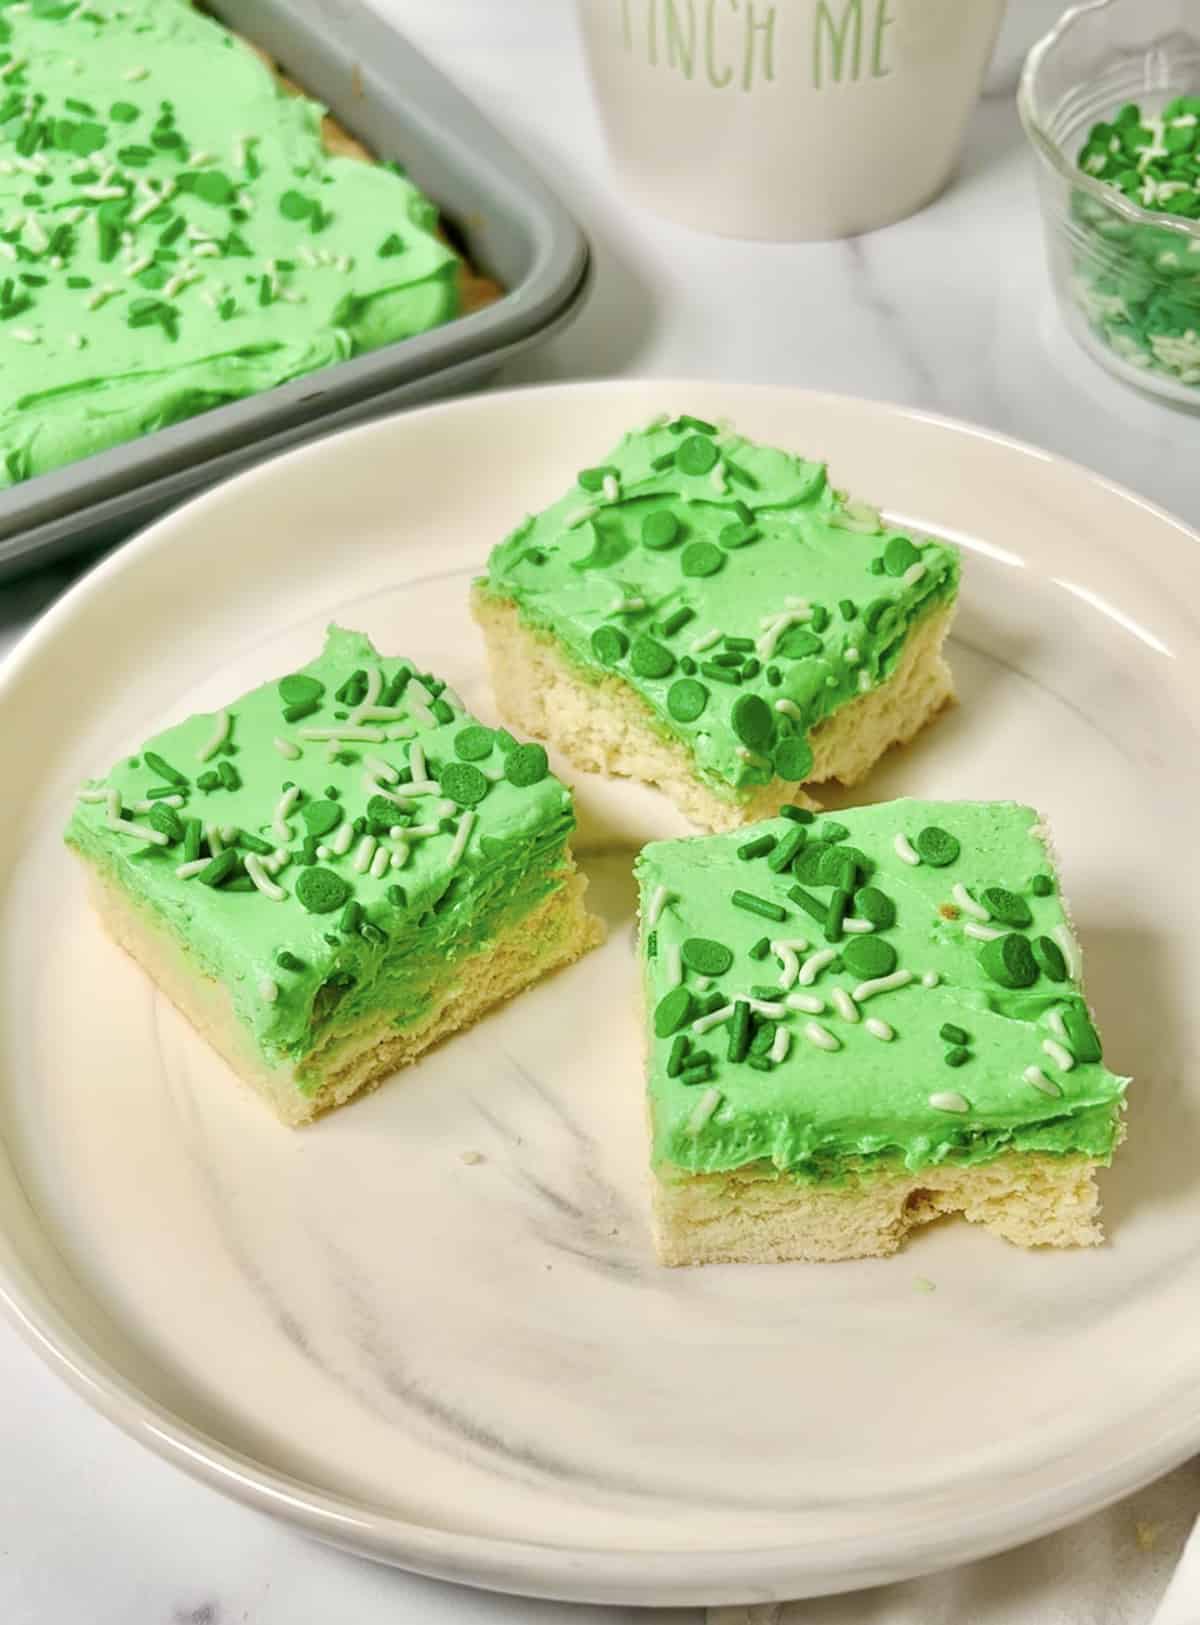 Sugar cookie bars with green frosting on a white plate.